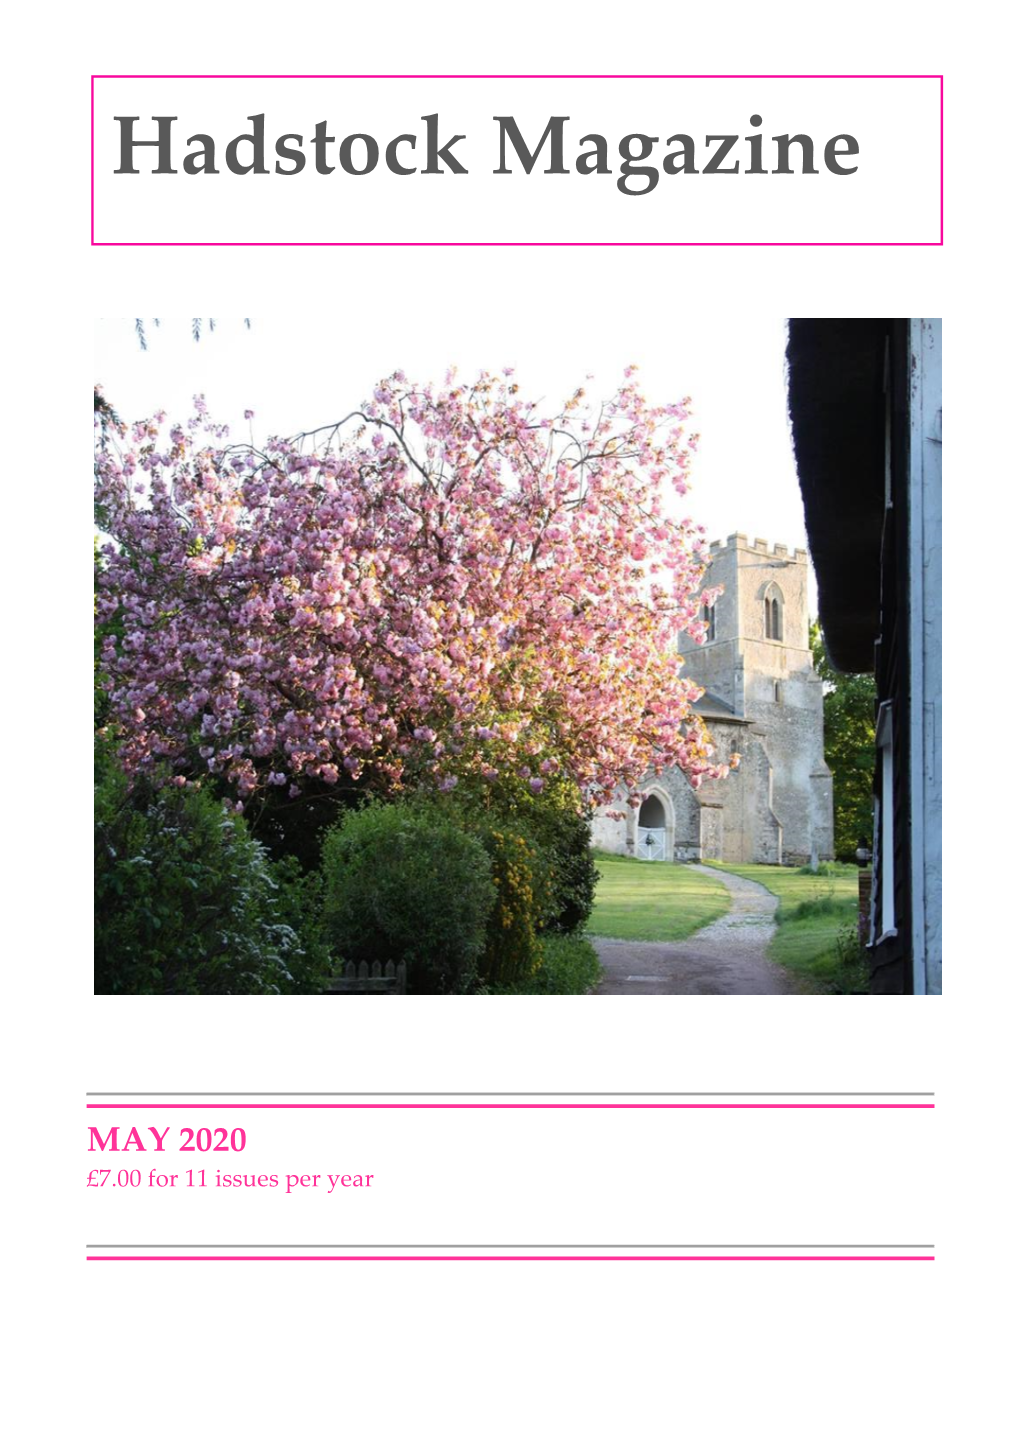 MAY 2020 £7.00 for 11 Issues Per Year